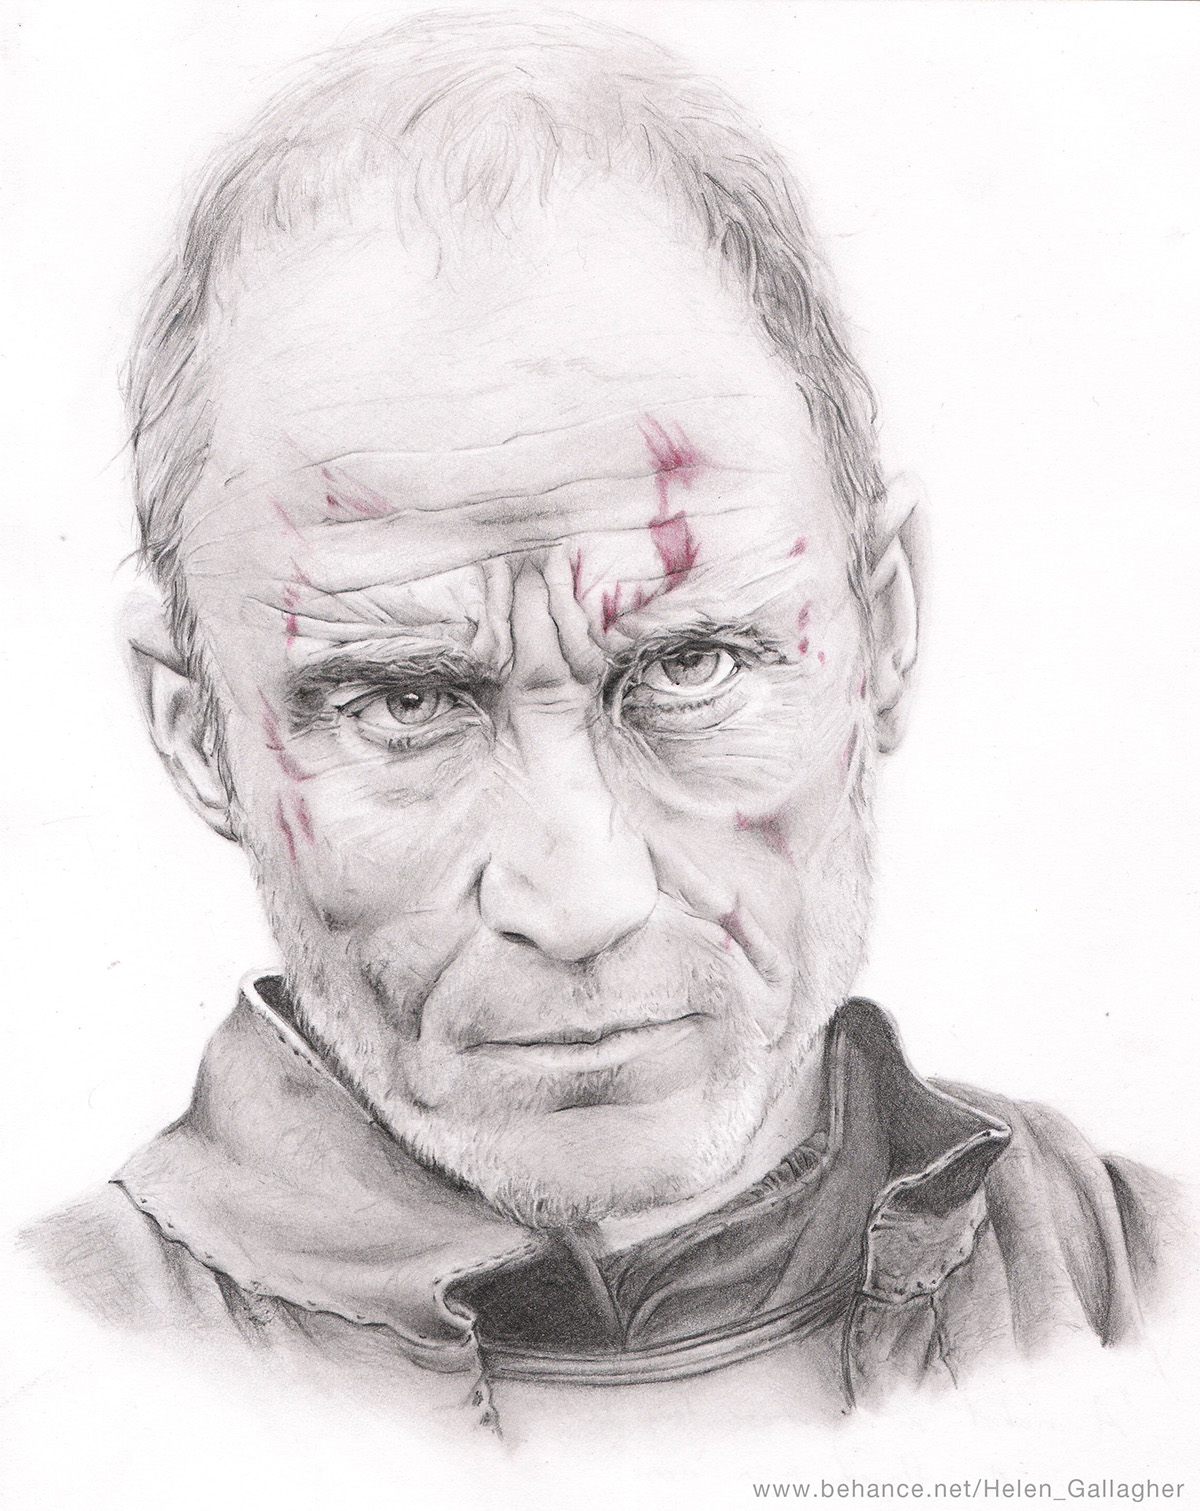 Roose Bolton Game of Thrones Dreadfort books Reading pink flayed man pencil paper ice and fire a song  fantasy literature George RR Martin Michael McElhatton